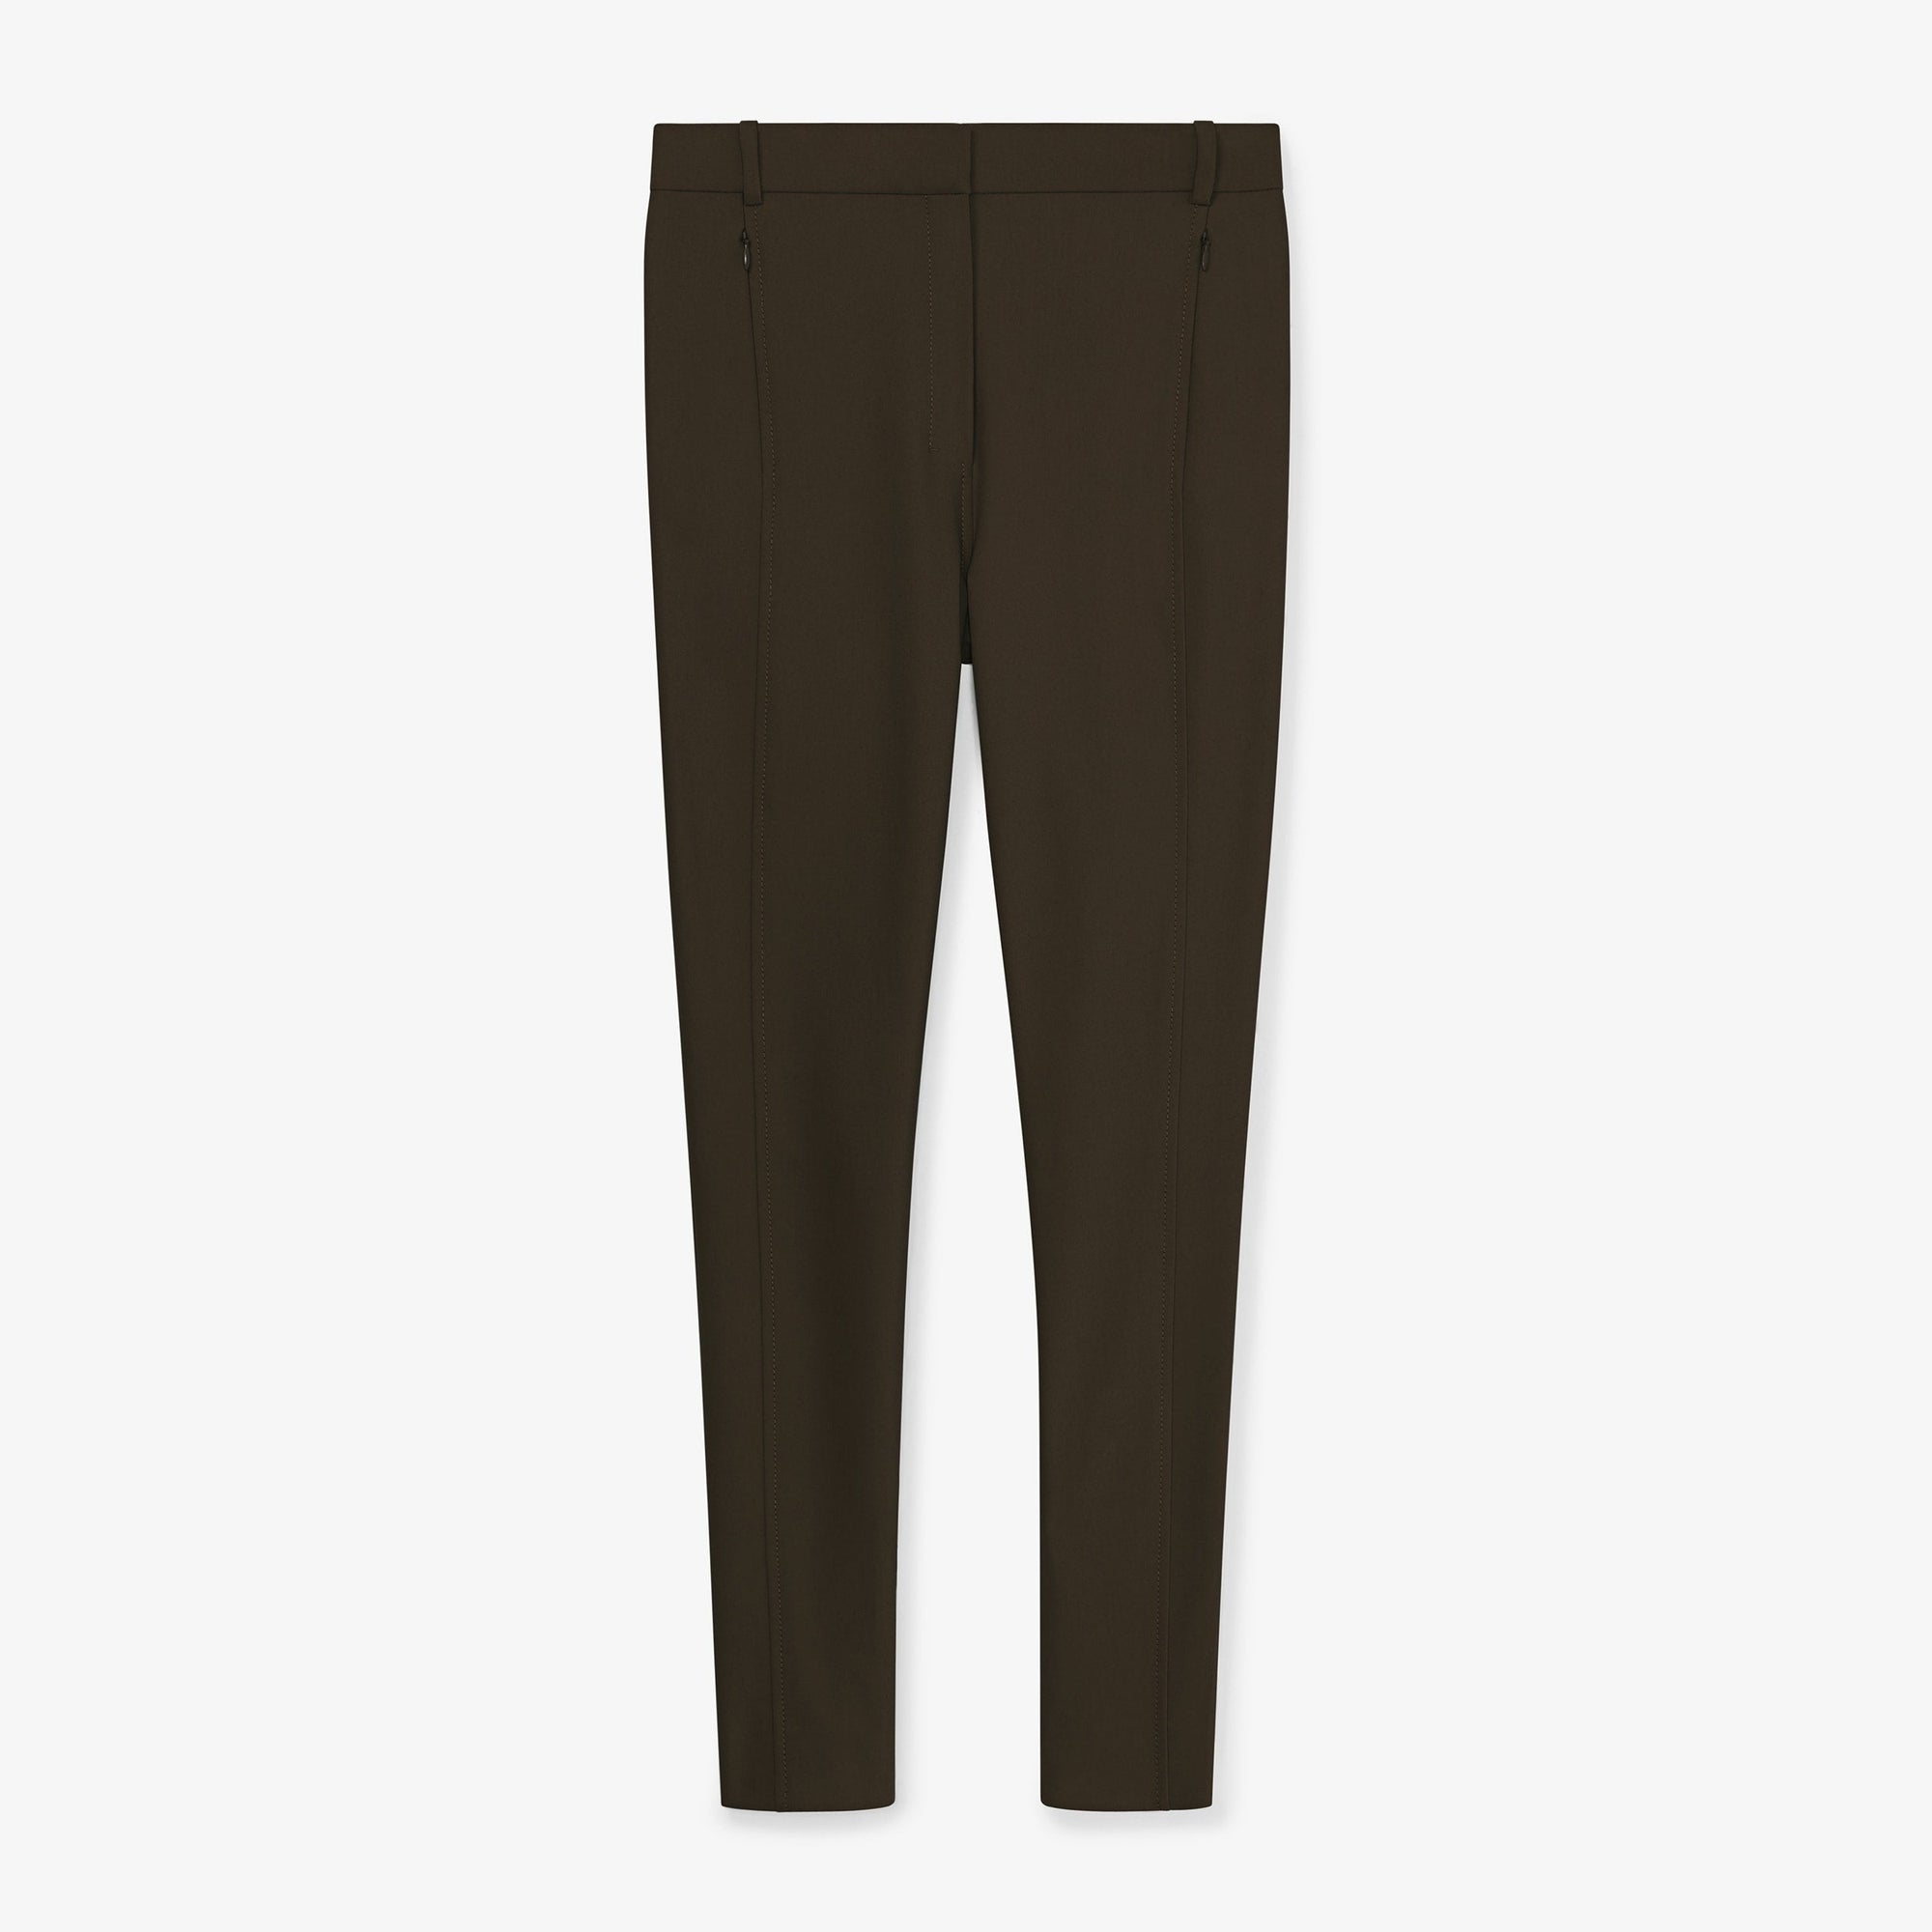 Packshot image of the curie pant in dark olive